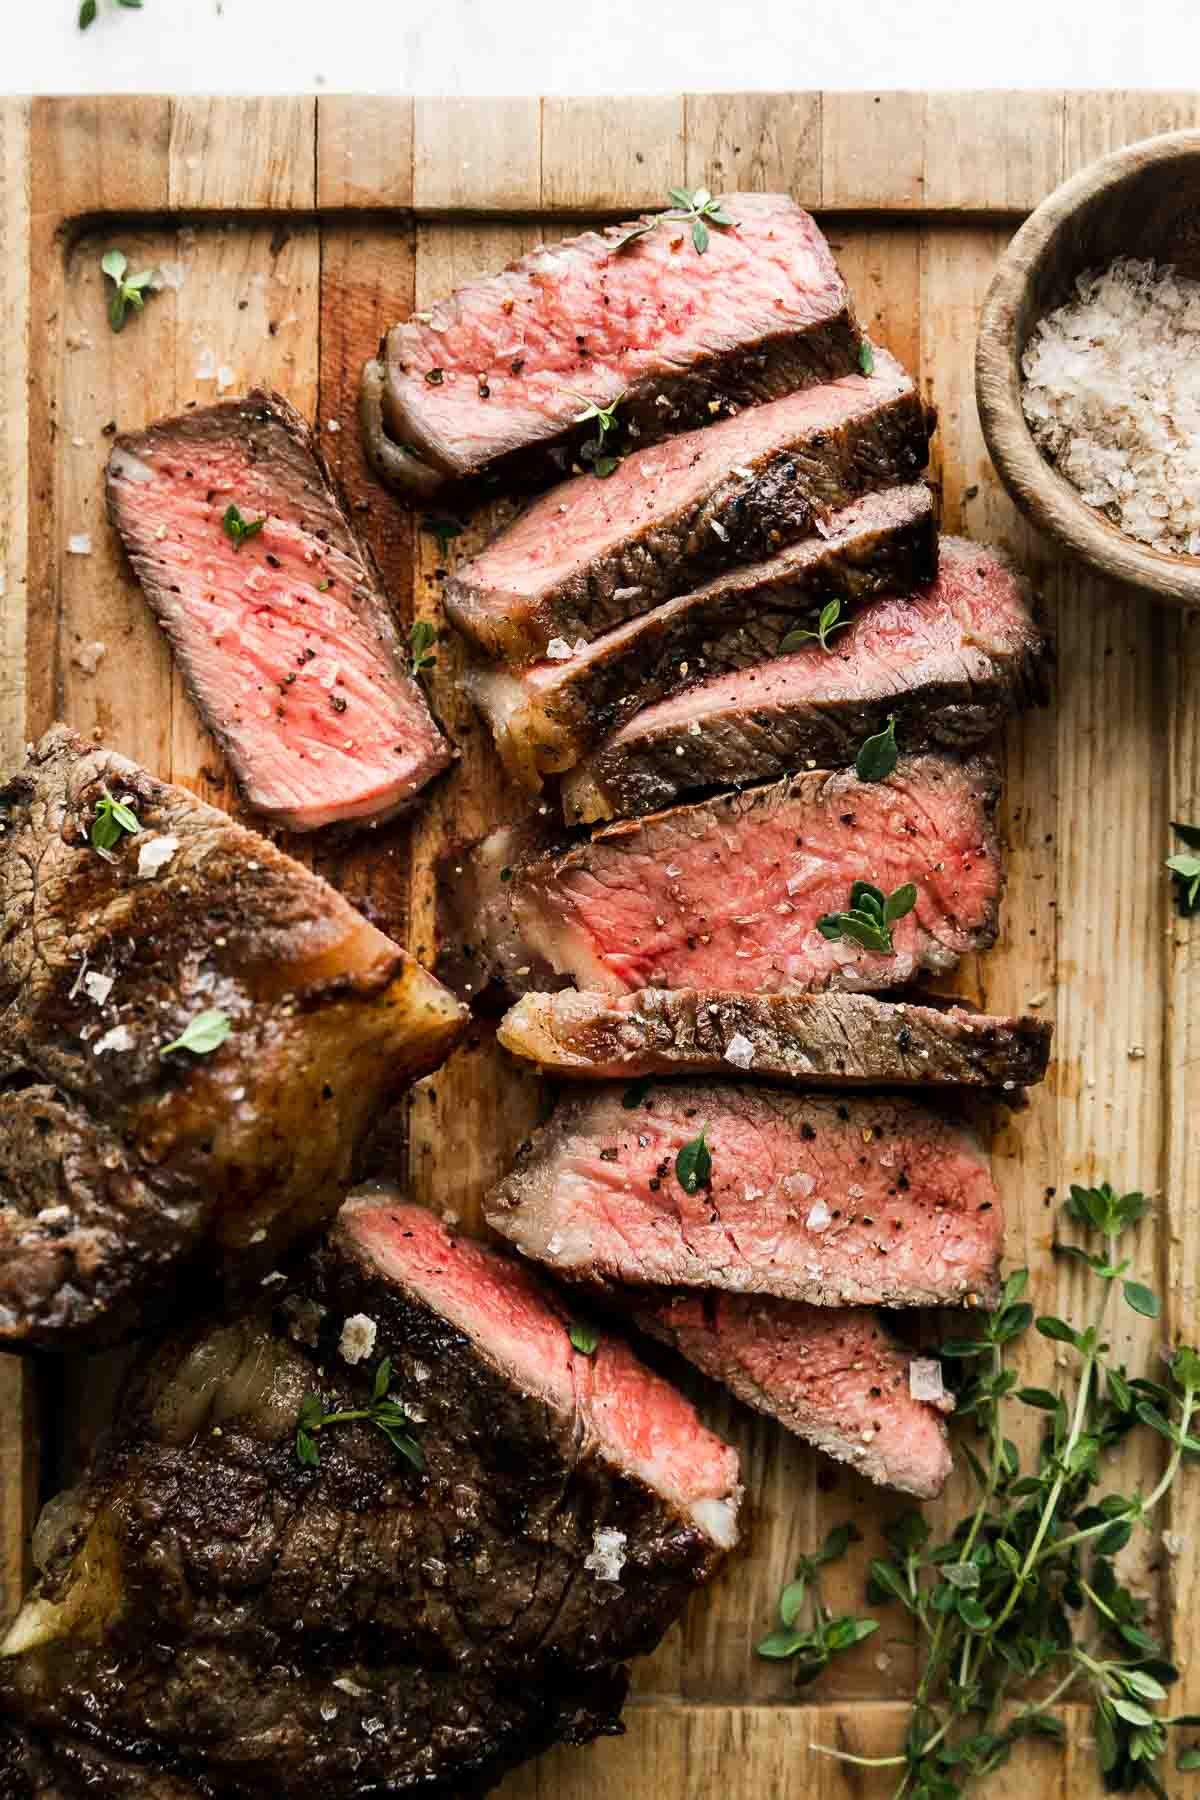 https://playswellwithbutter.com/wp-content/uploads/2022/05/Perfect-Grilled-Steak-Butter-Basted-with-Herb-Brush-24.jpg